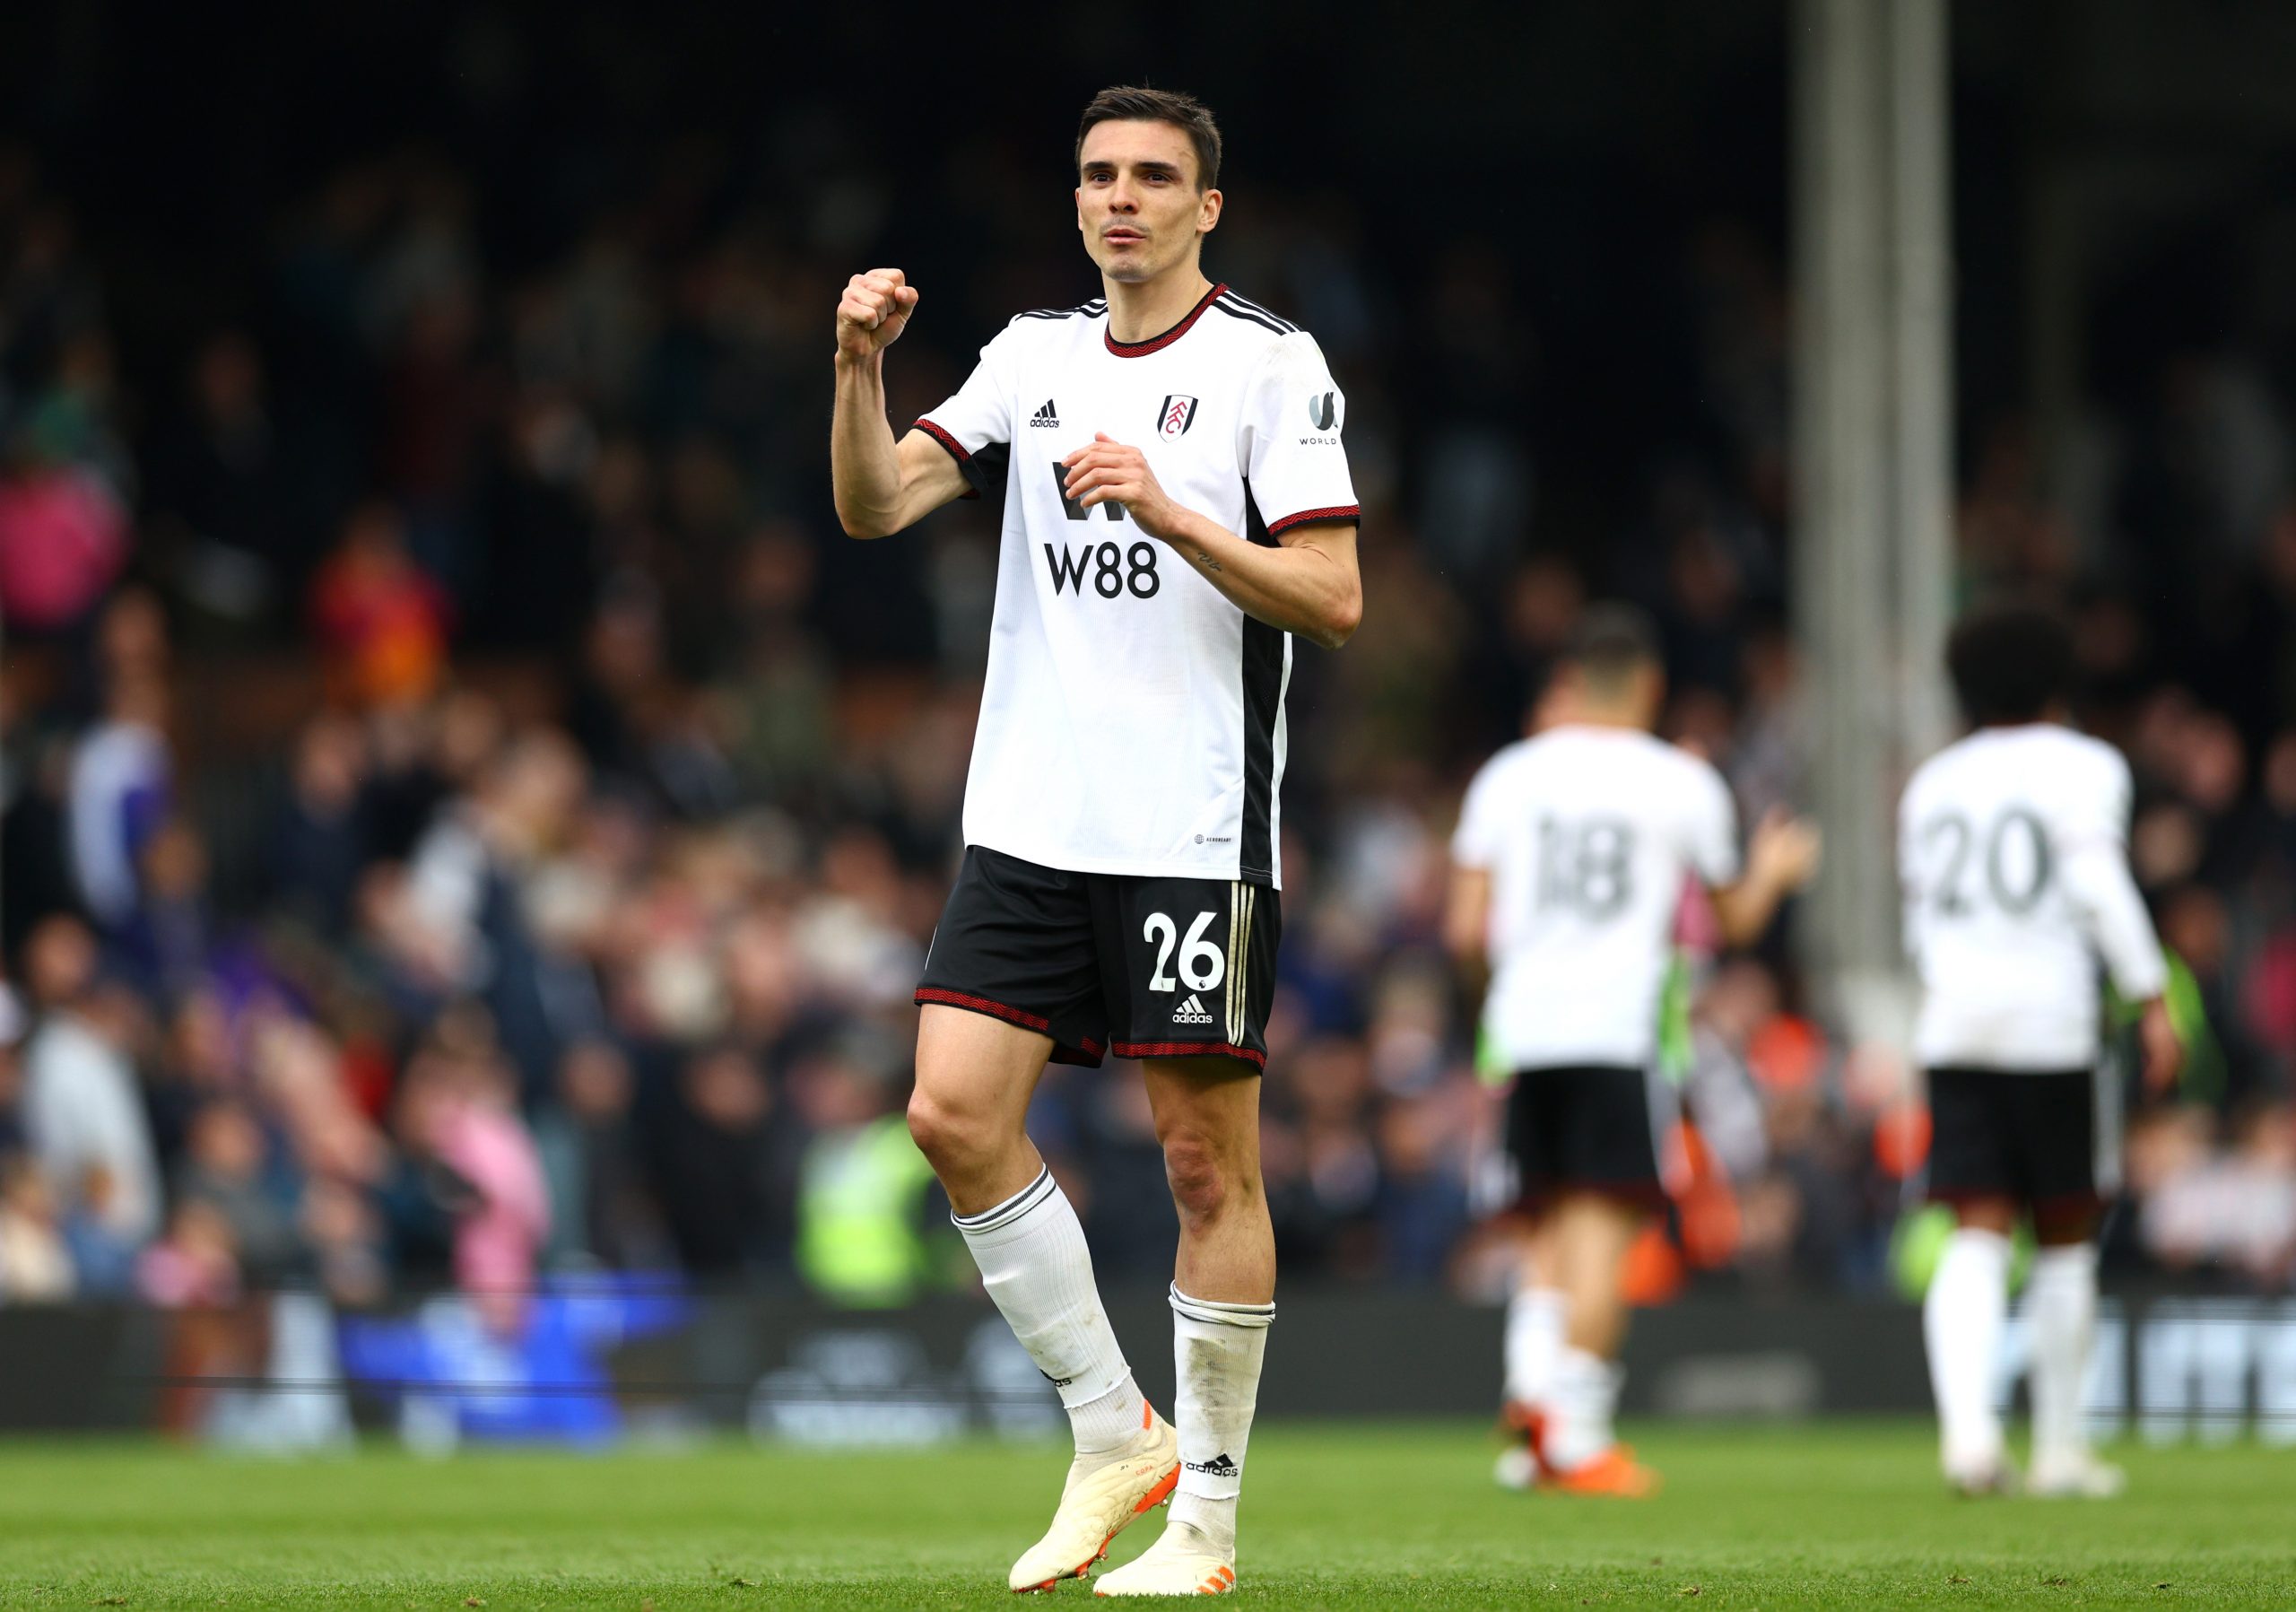 LONDON, ENGLAND - APRIL 22: Joao Palhinha of Fulham celebrates following the Premier League match between Fulham FC and Leeds United at Craven Cottage on April 22, 2023 in London, England. (Photo by Clive Rose/Getty Images)